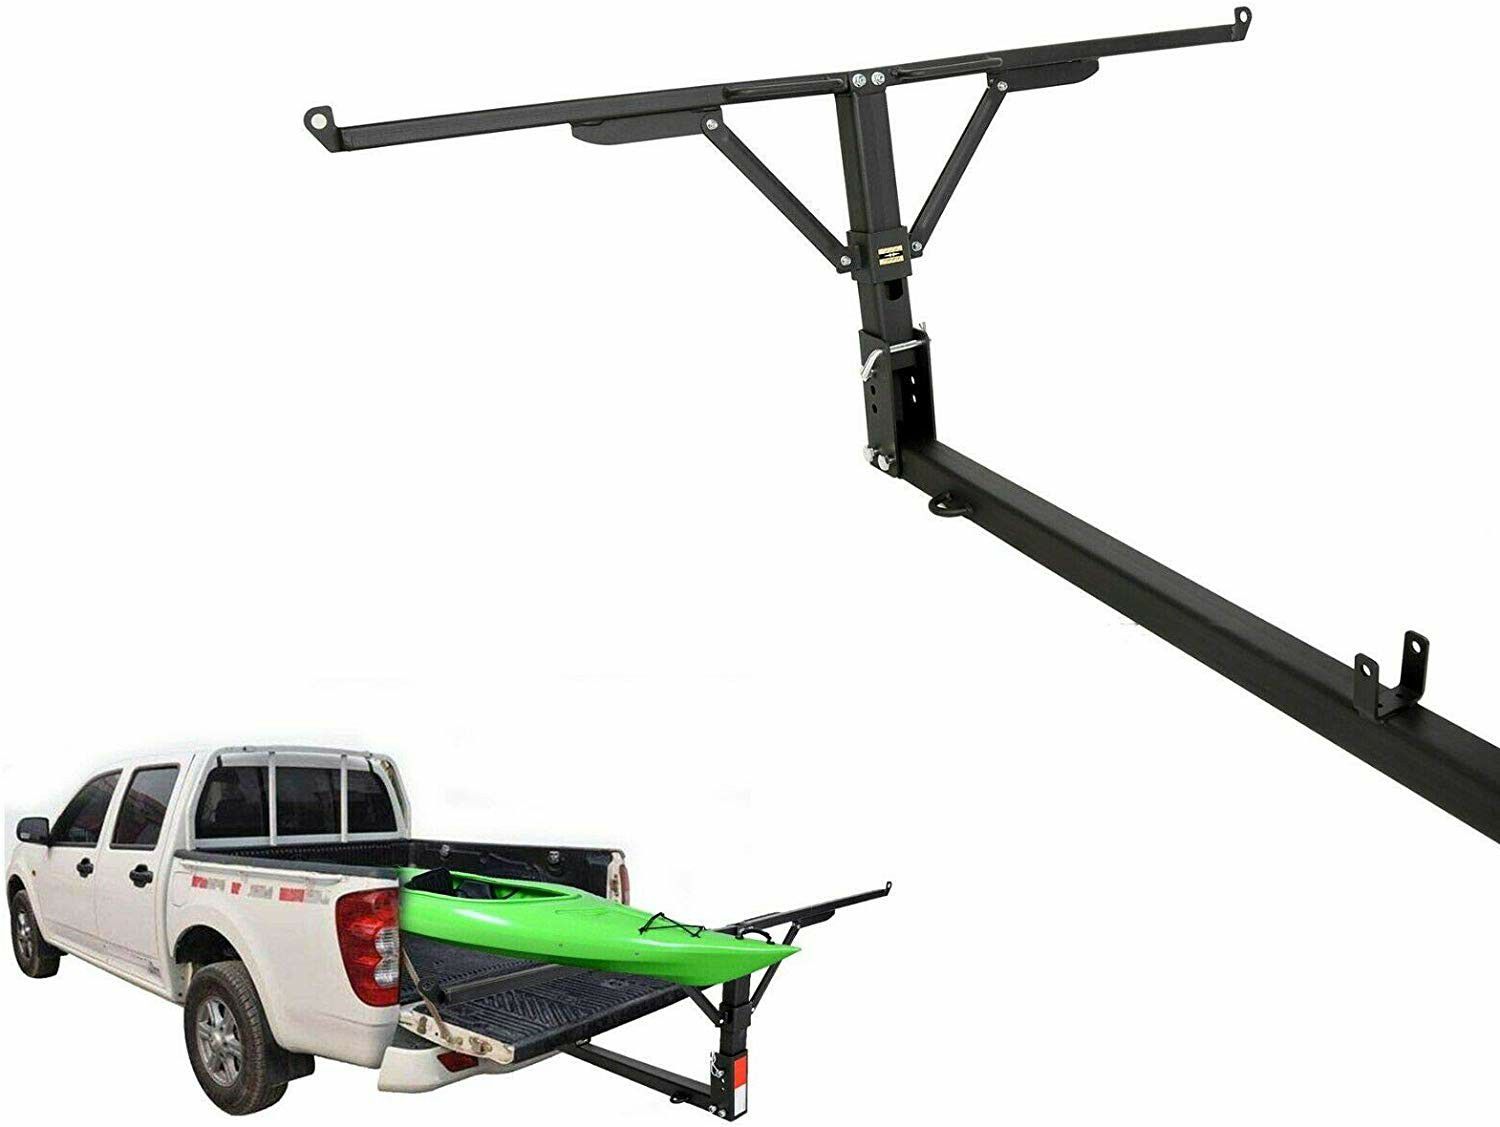 Ecotric foldable pick up truck bed hitch extender extension rack for canoes, kayaks, lumber w/ flag